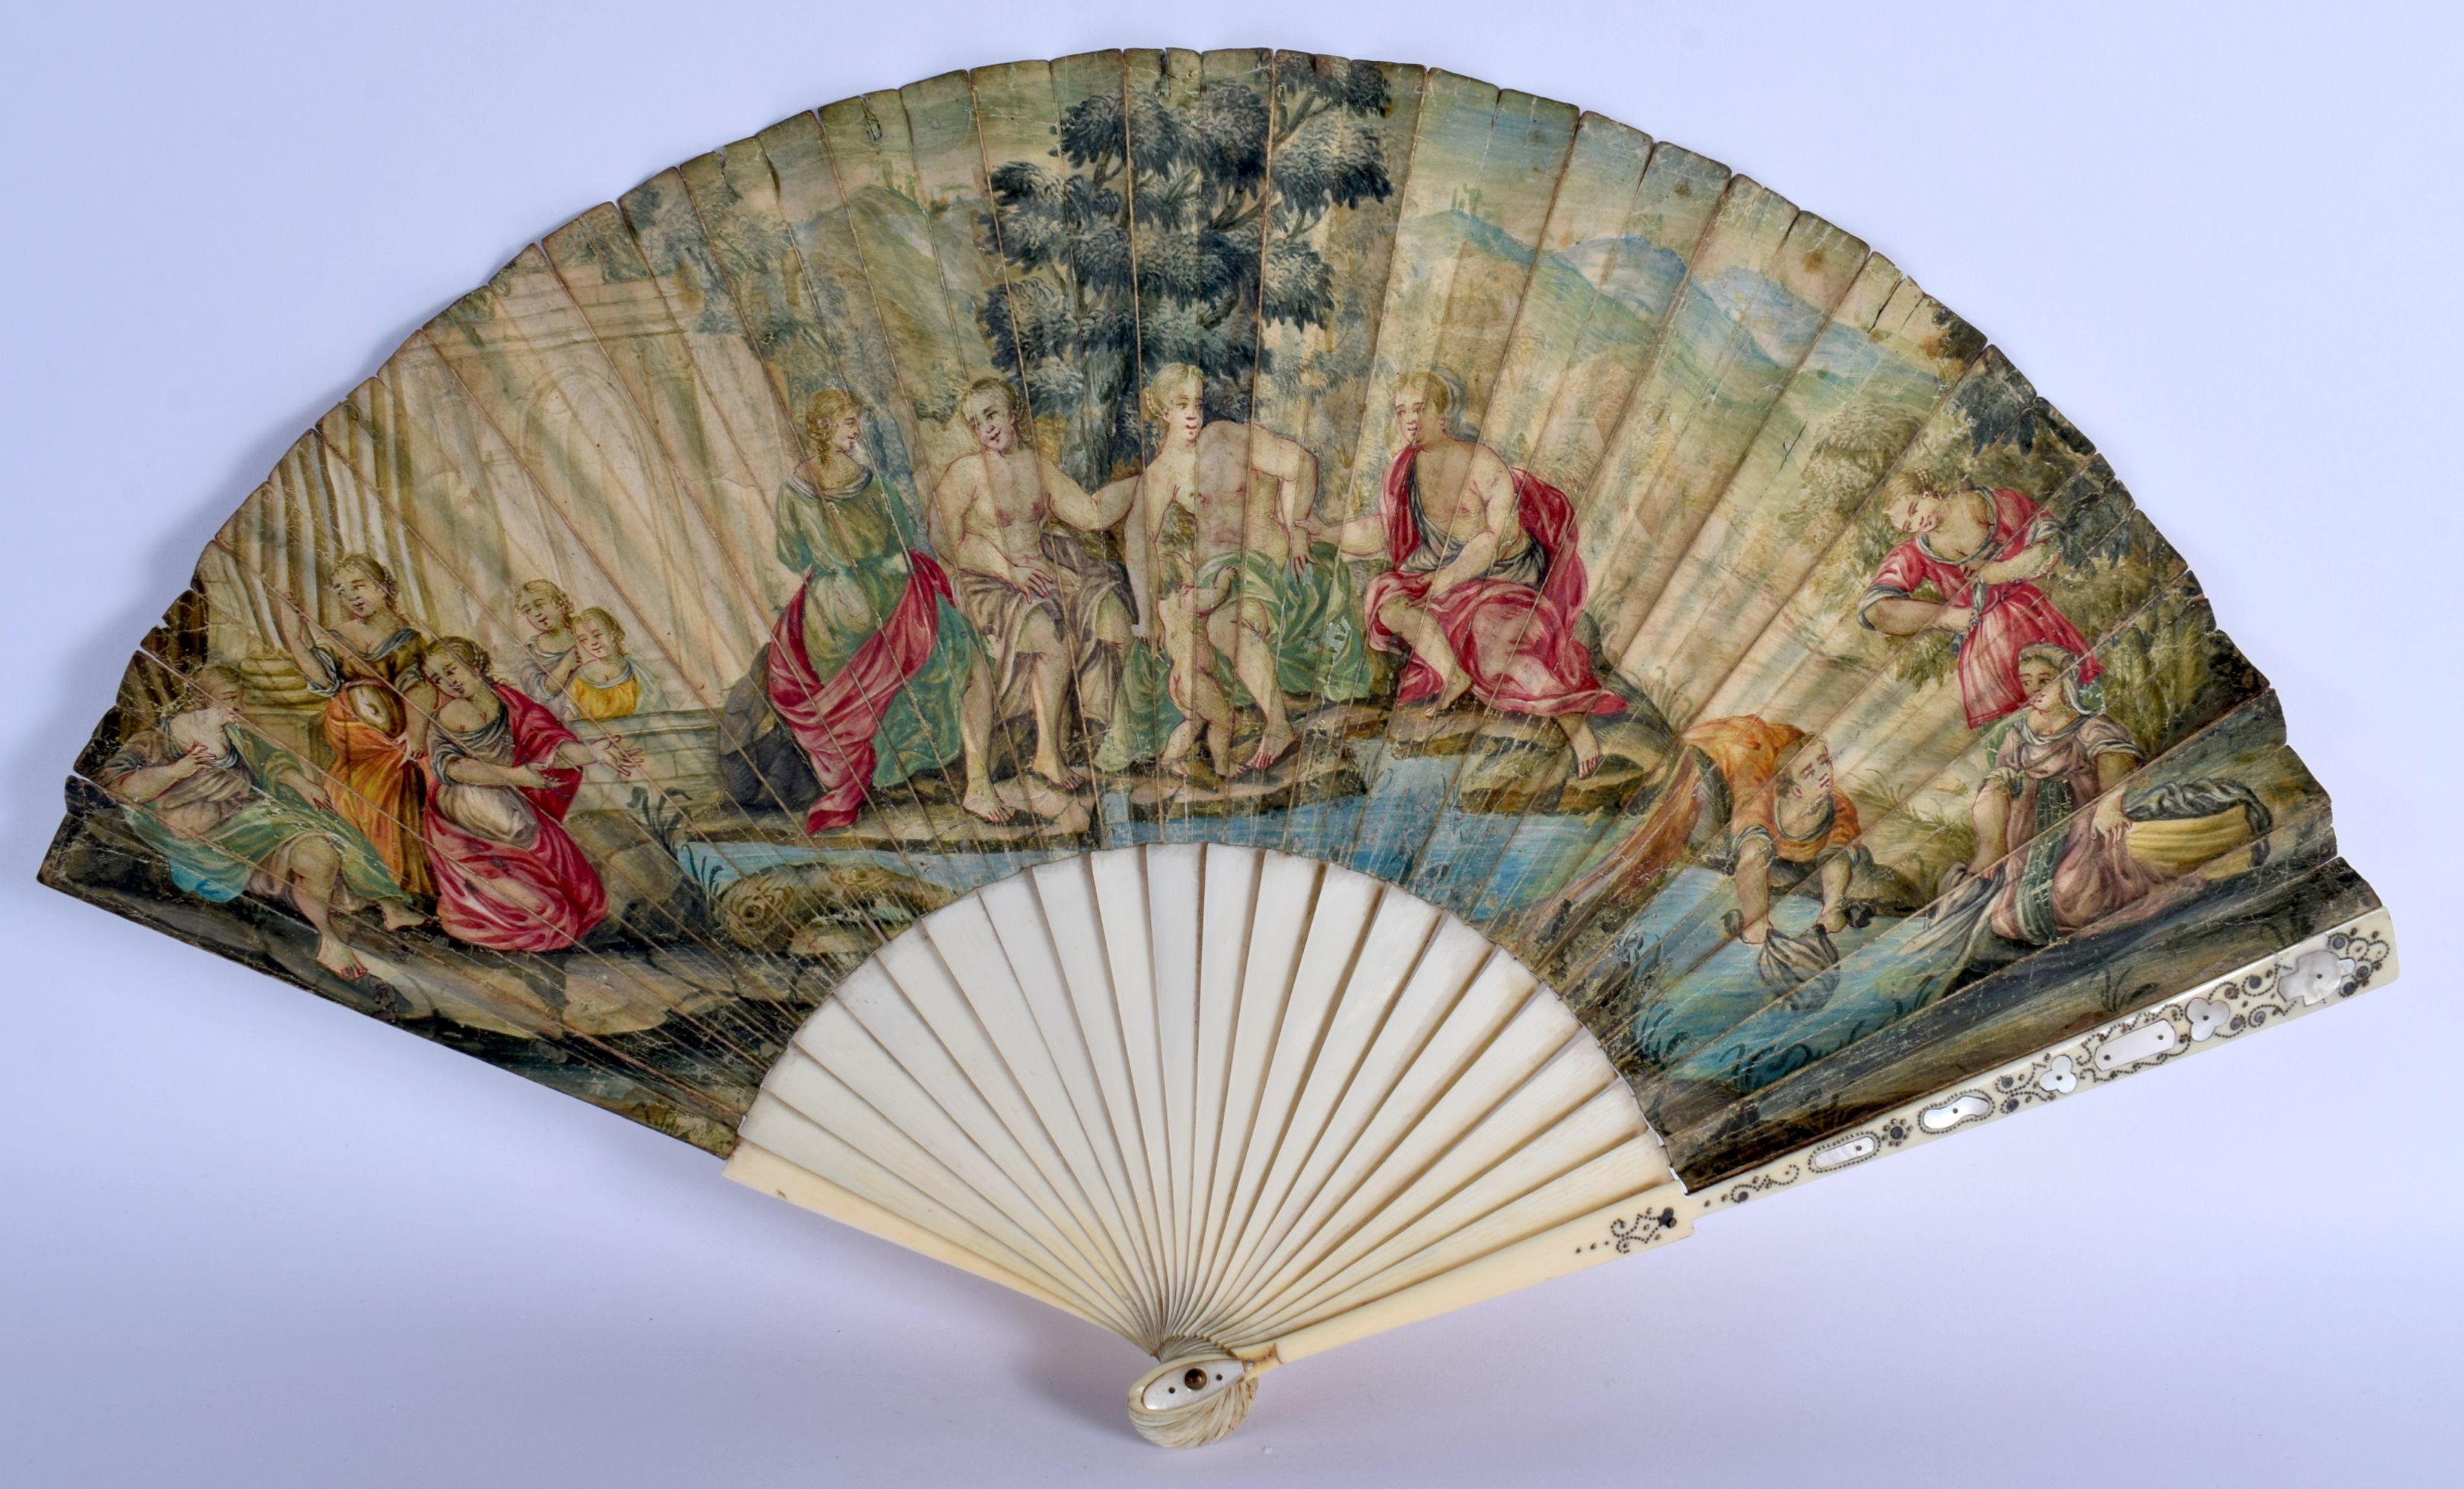 A FINE LATE 18TH CENTURY EUROPEAN PAINTED PIQUE WORK FAN decorated with classical scenes. 48 cm wide